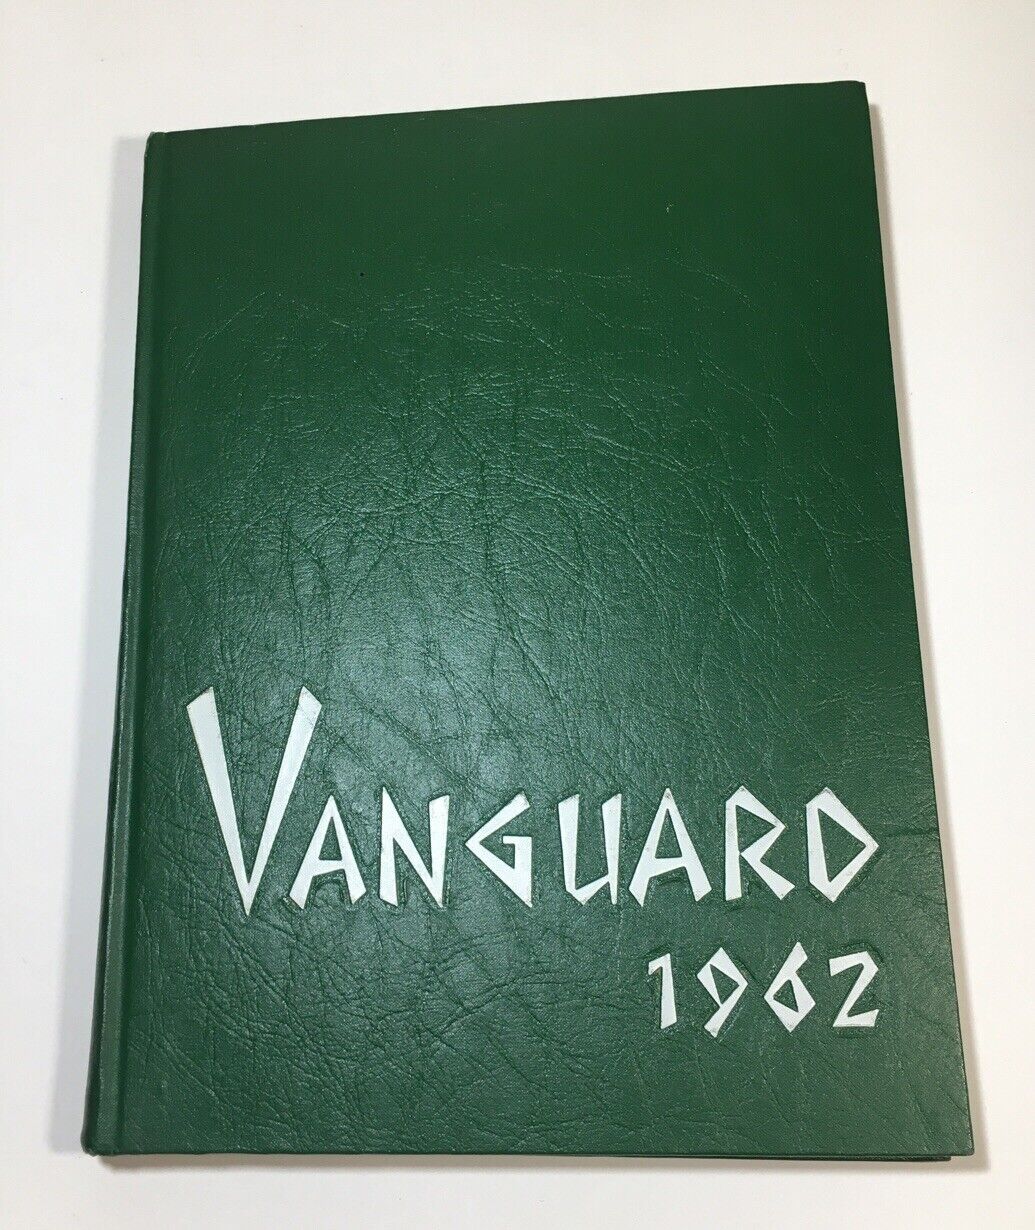 1962 VANGUARD YEARBOOK ROCKLAND COMMUNITY COLLEGE SUFFERN NY.